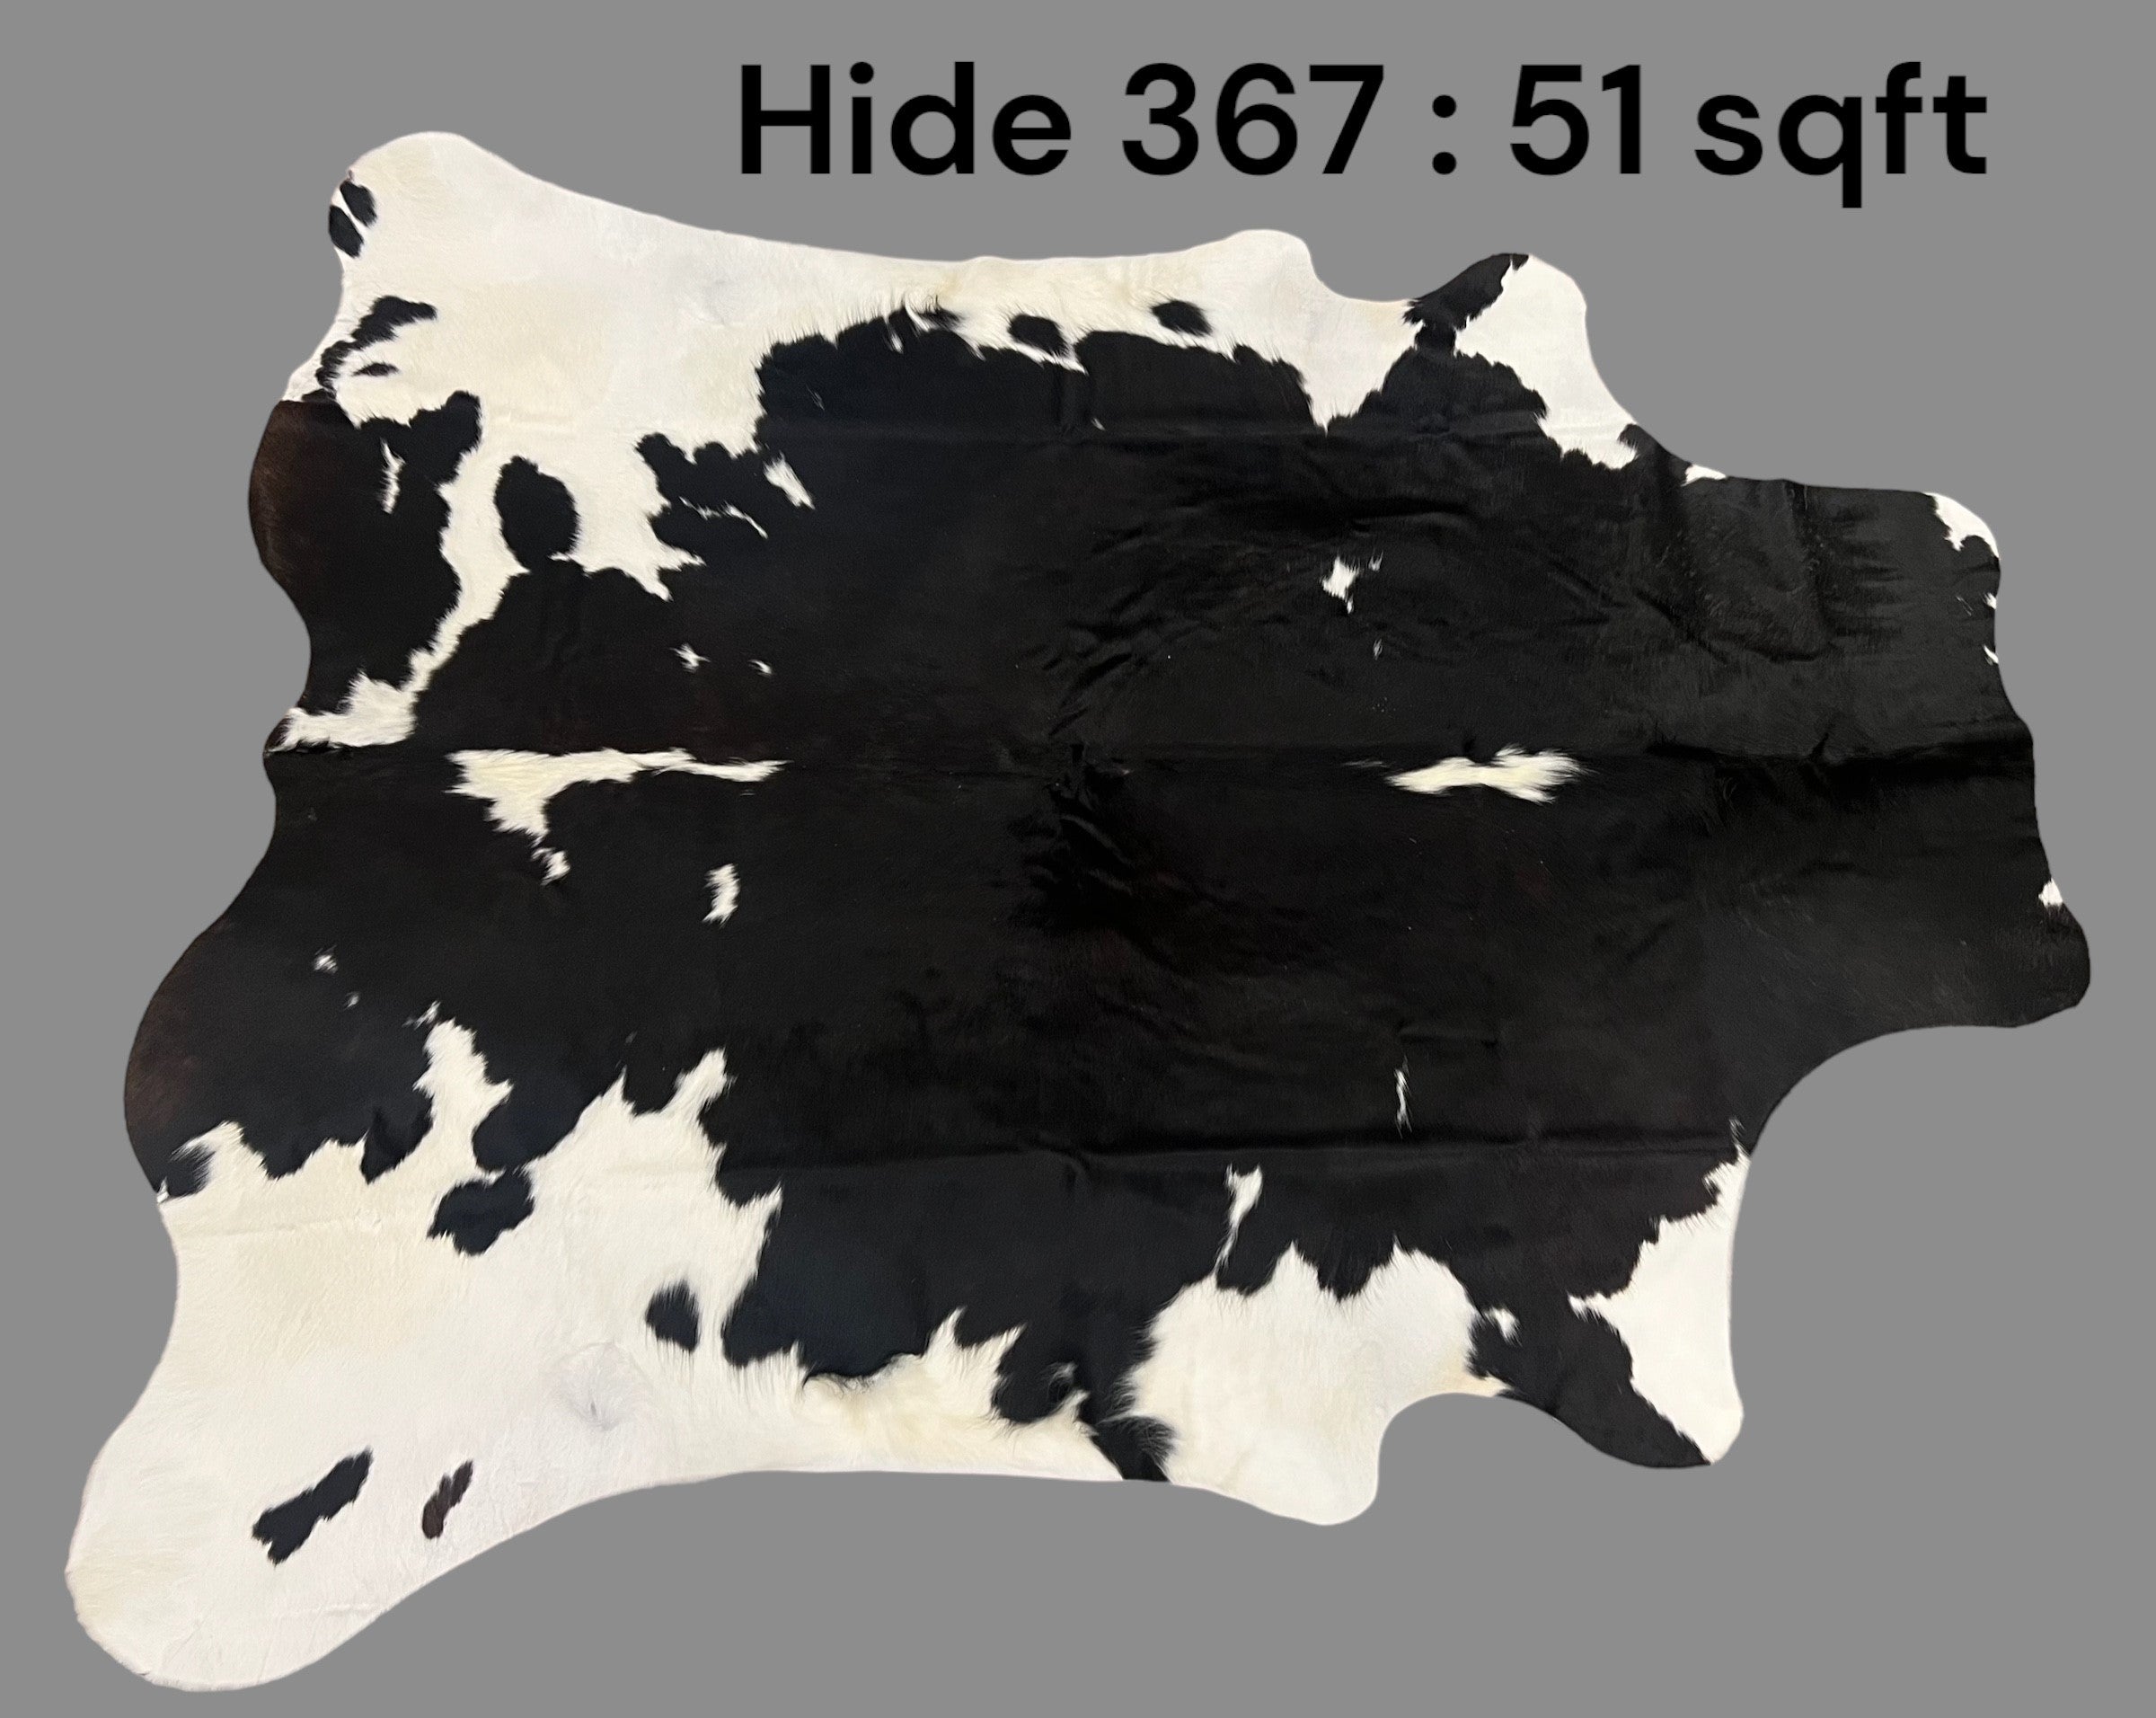 Natural Hair On Cow Hide : This Hide Is Perfect For Wall Hanging, Leather Rugs, Leather Upholstery & Leather Accessories. (Hide367)